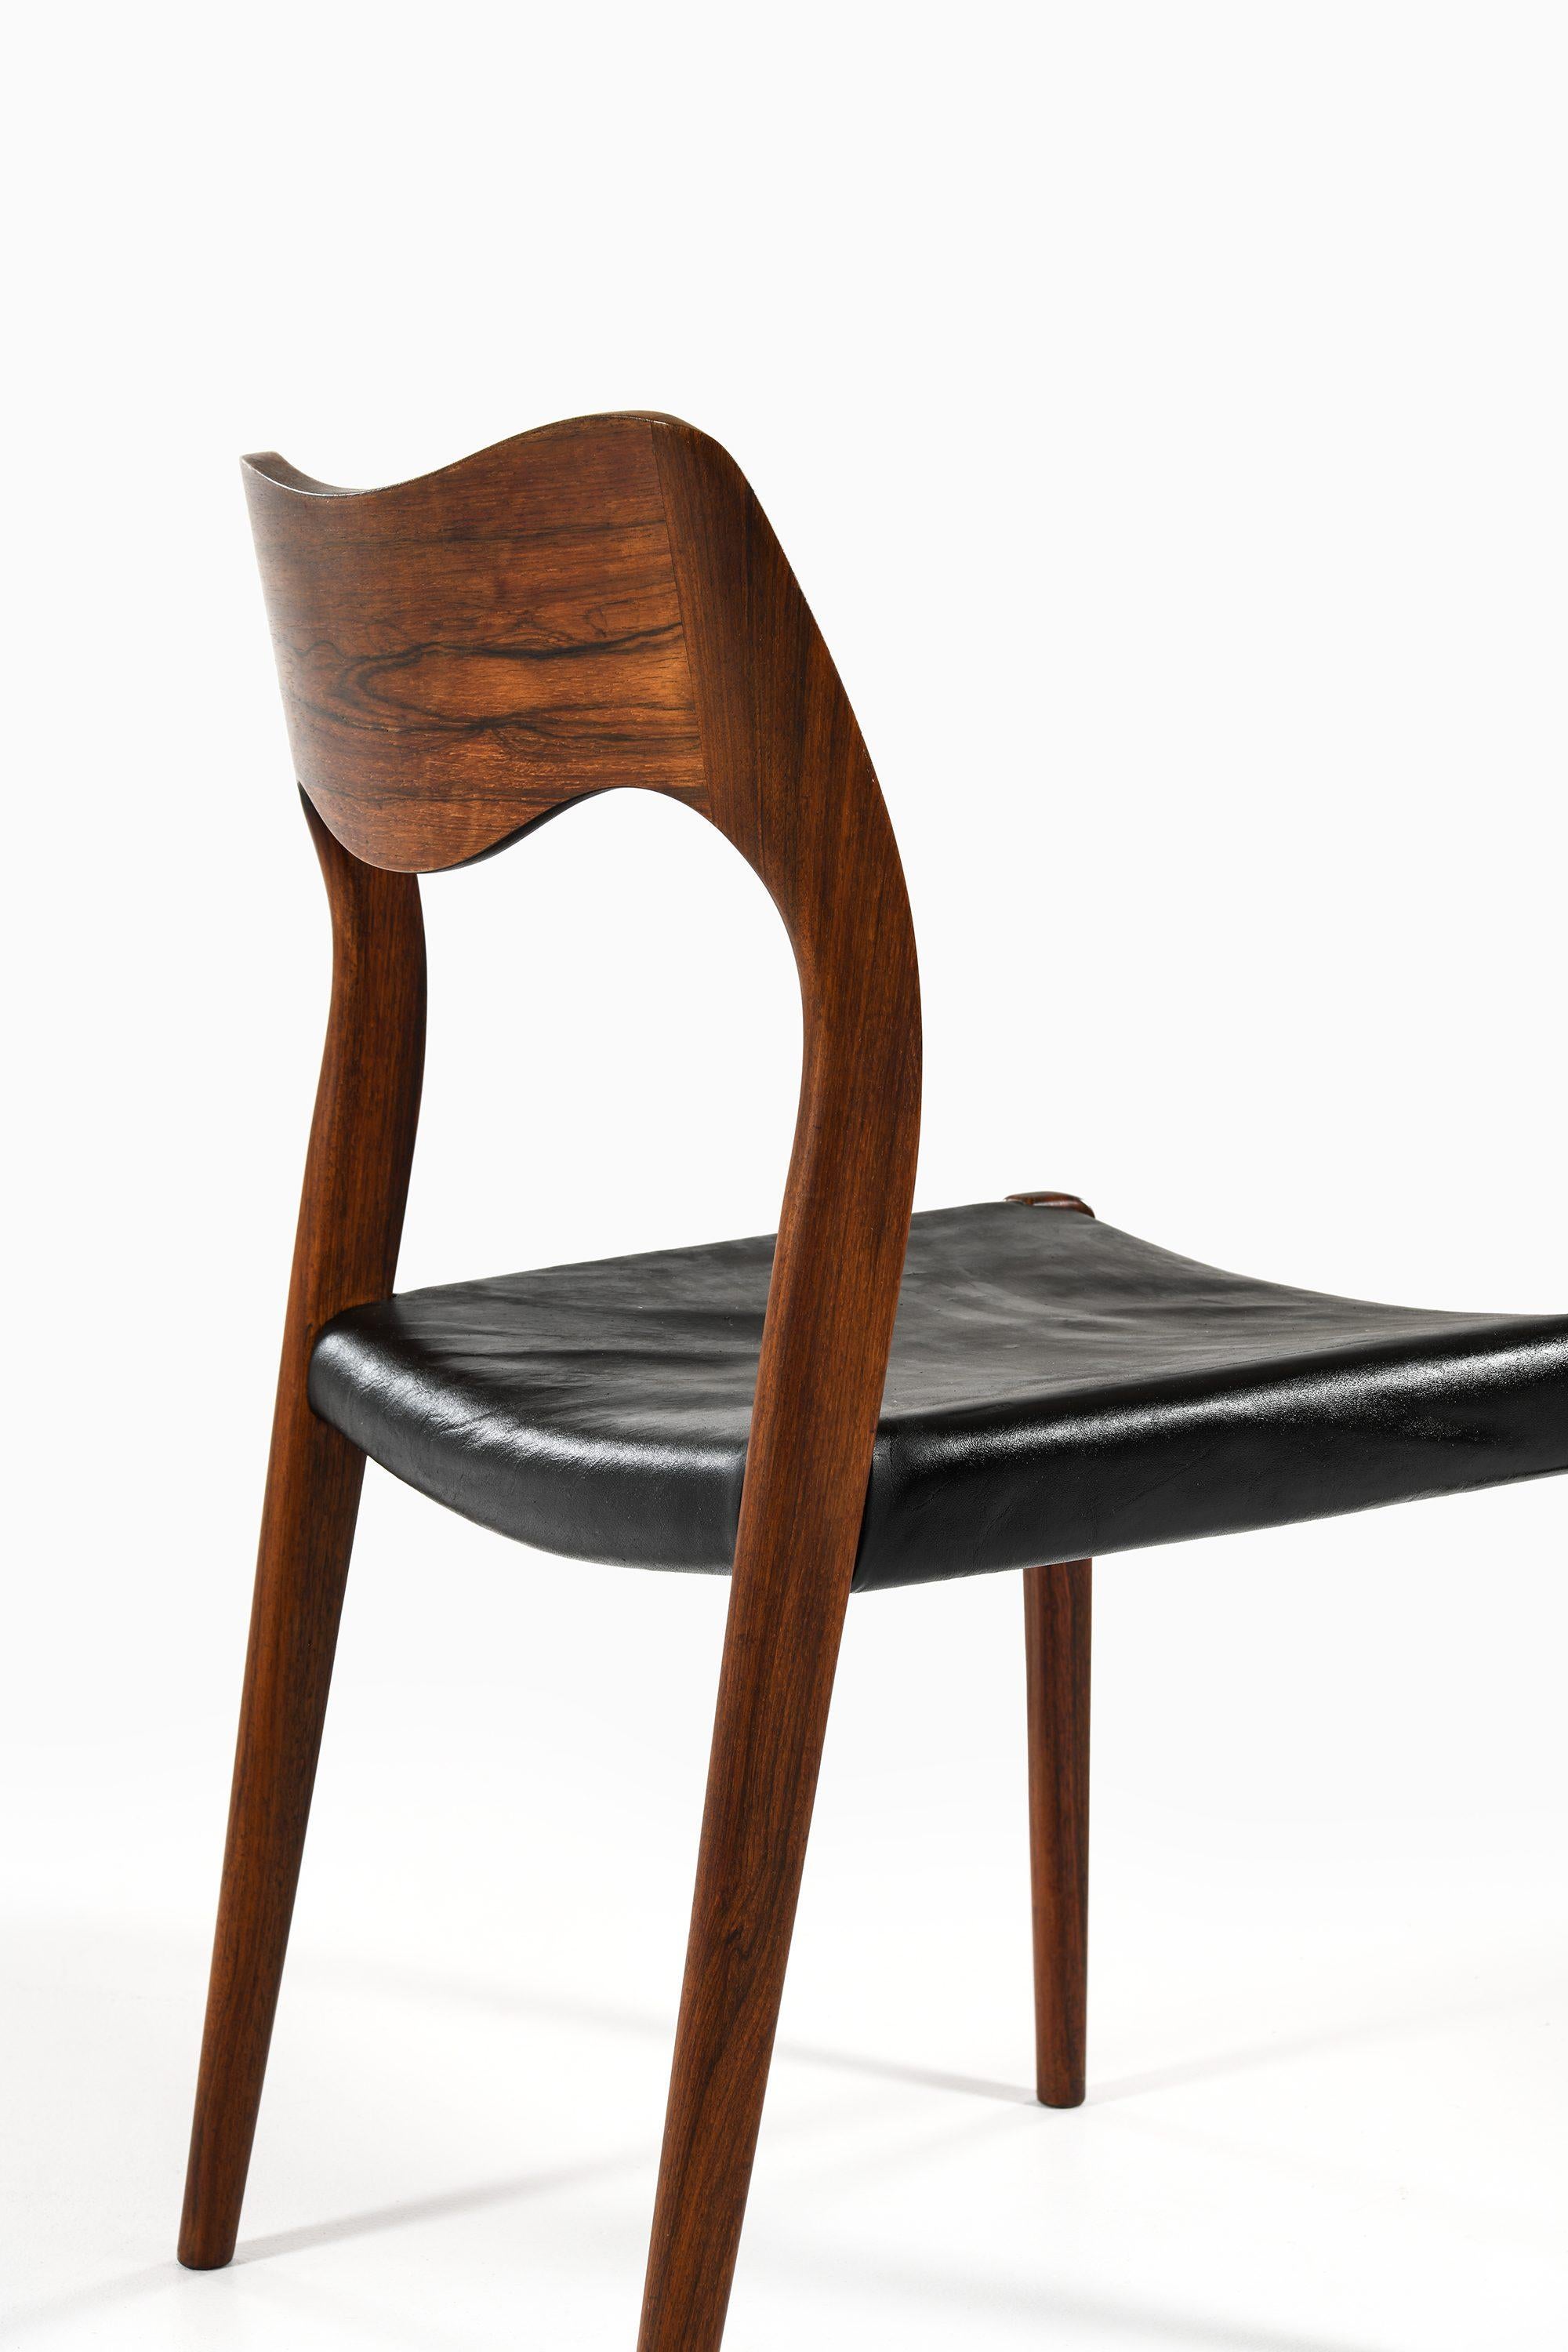 Set of 6 Dining Chairs in Rosewood and Original Black Leather by Niels O. Møller, 1951

Additional Information:
Material: Rosewood and original black leather
Style: Mid century, Scandinavian
Set of 6 dining chairs model 71
Produced by J.L.